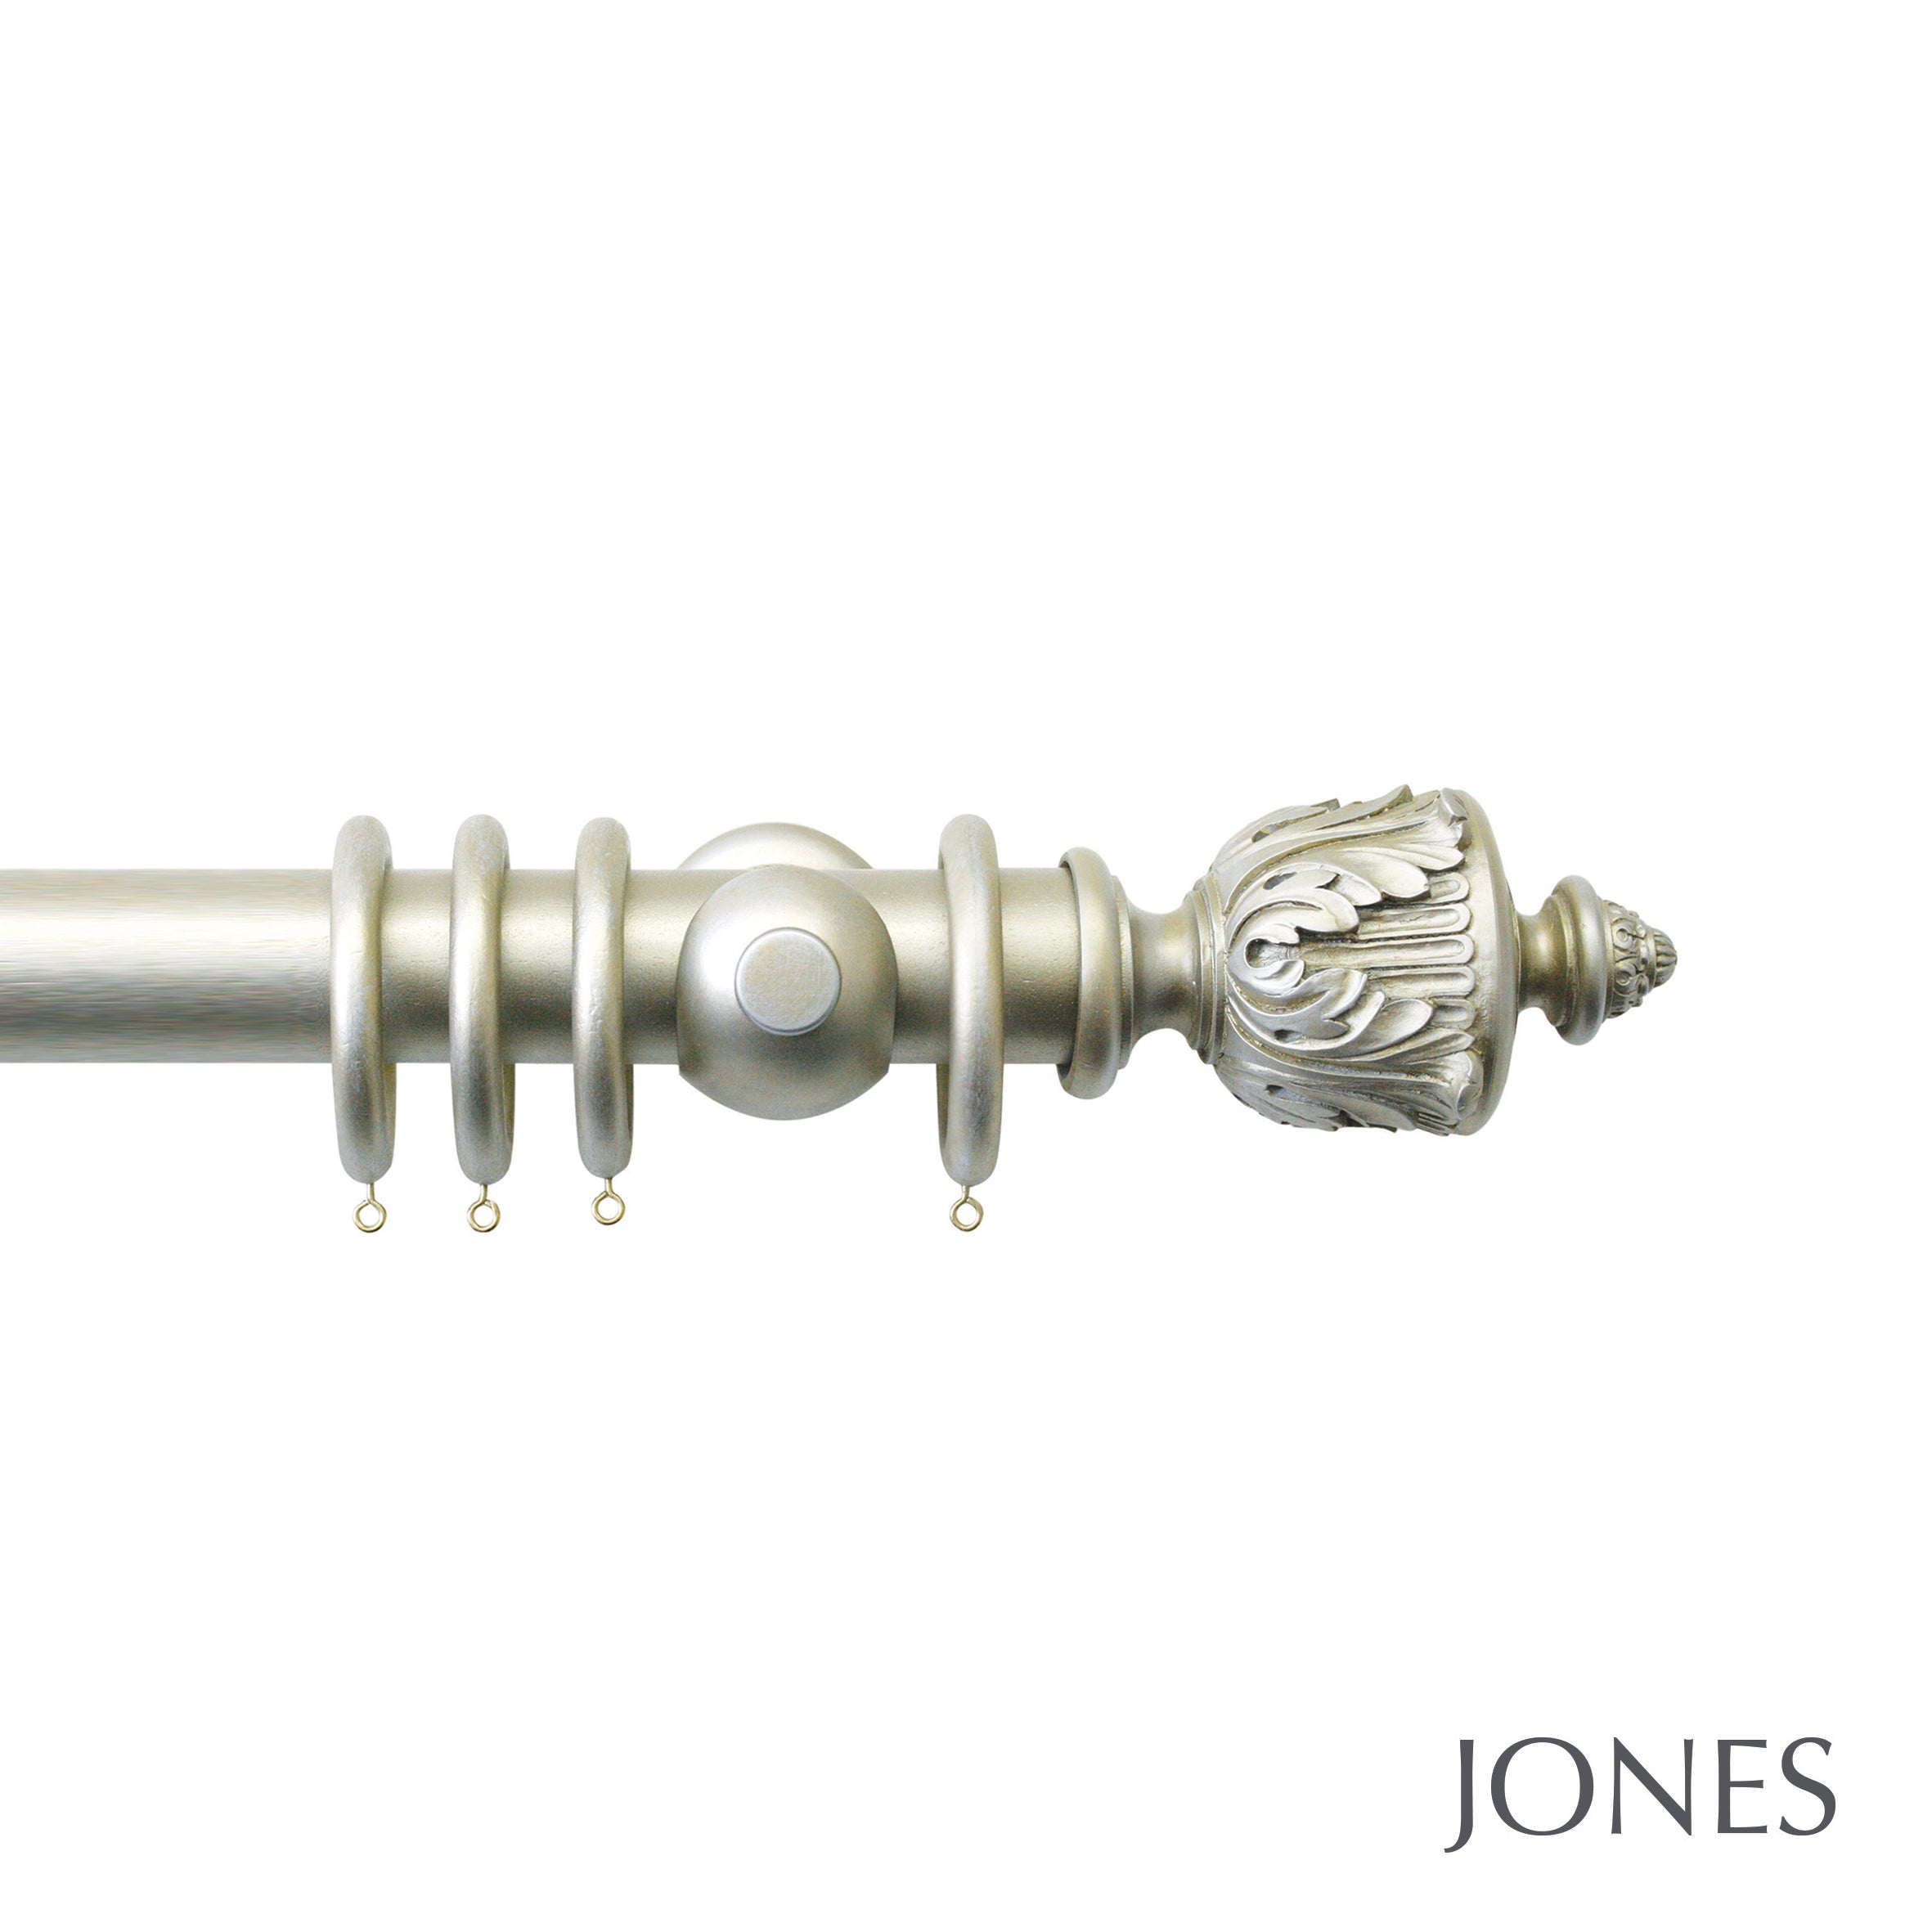 Jones Interiors Grande Acanthus Finial Curtain Pole Set in Champagne Silver